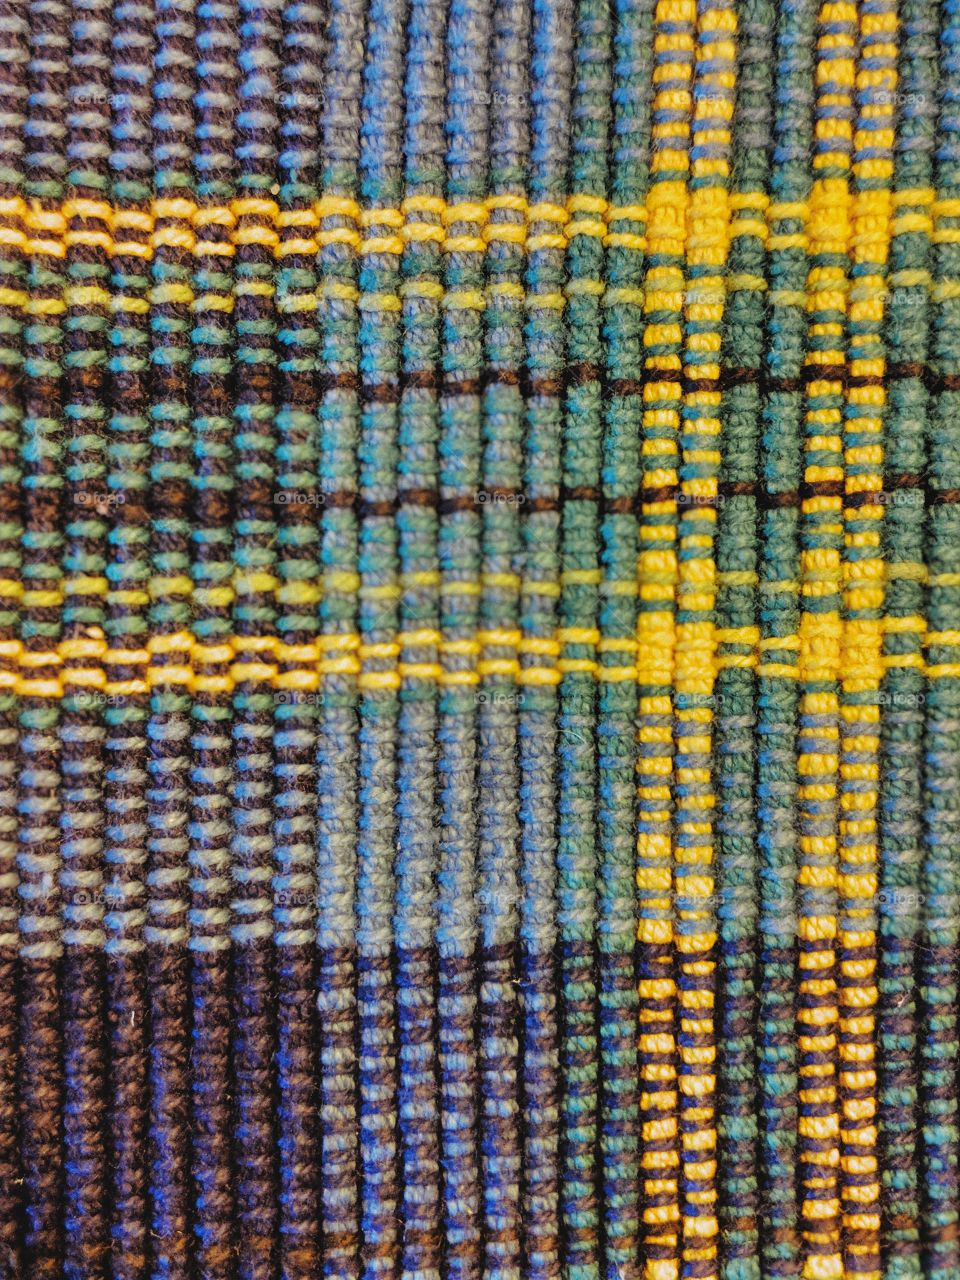 Woven Blue Green and Yellow Texture/Pattern